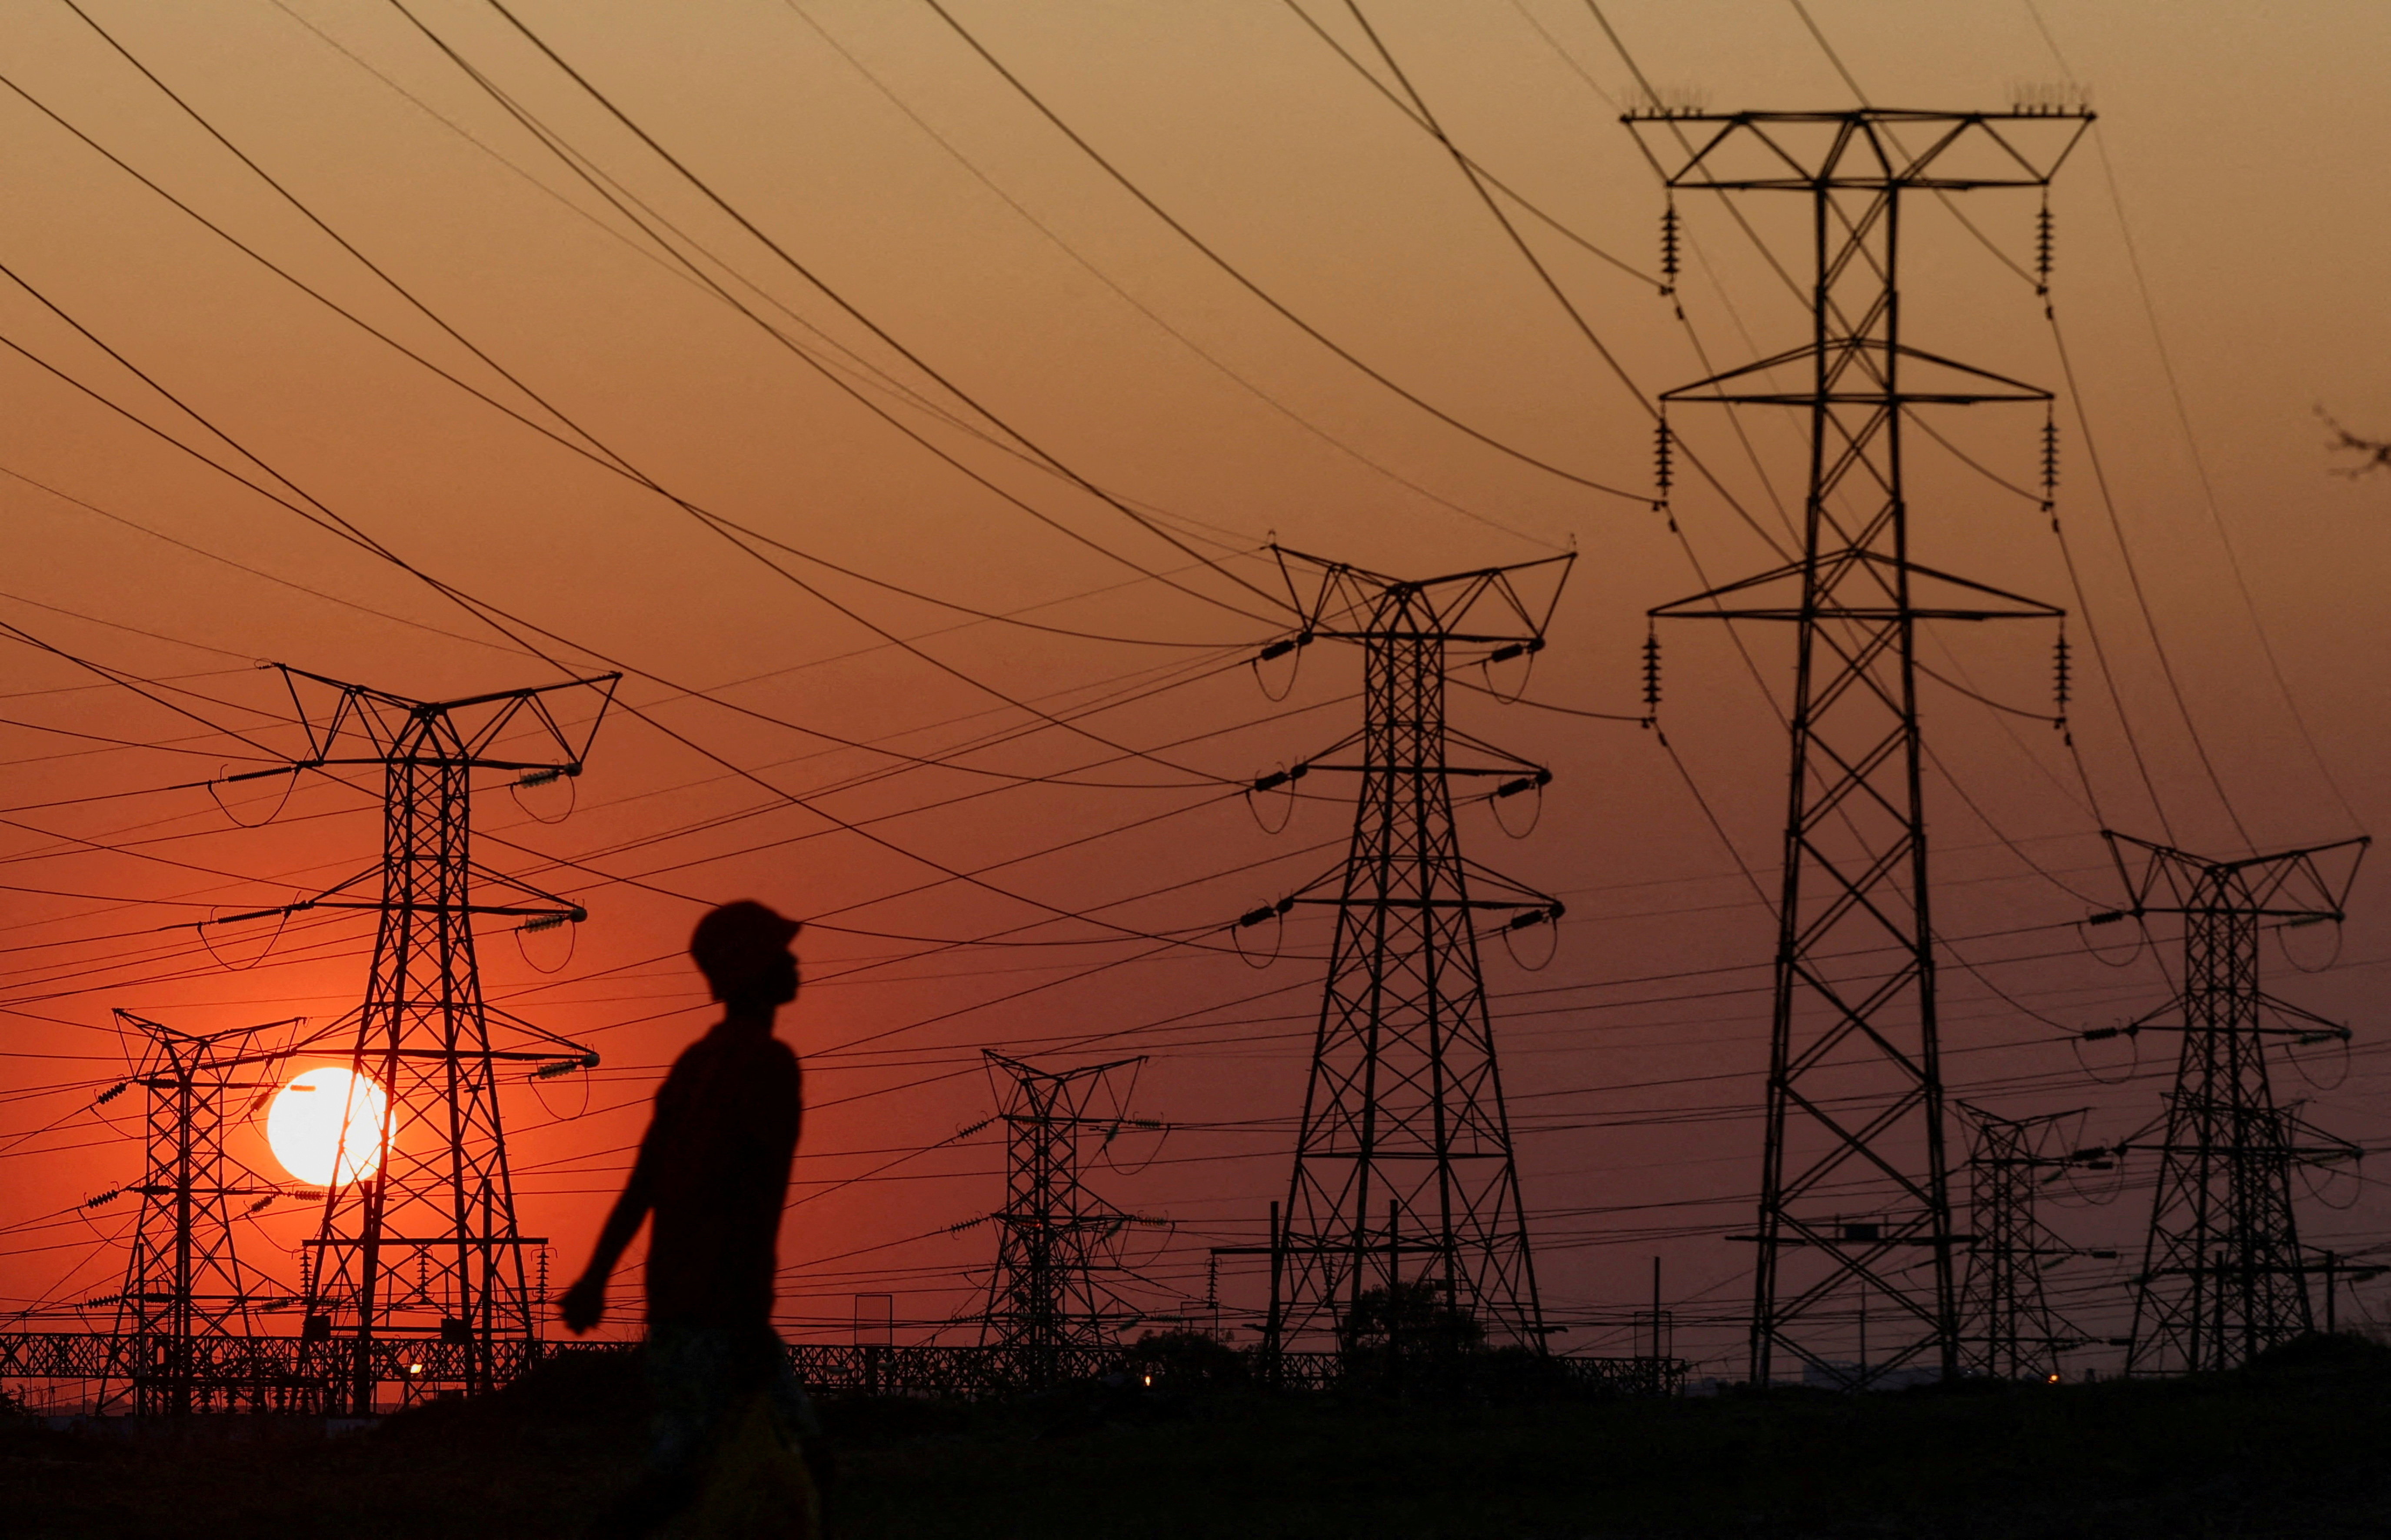 South Africans Are Going Green to Escape Incessant Power Cuts